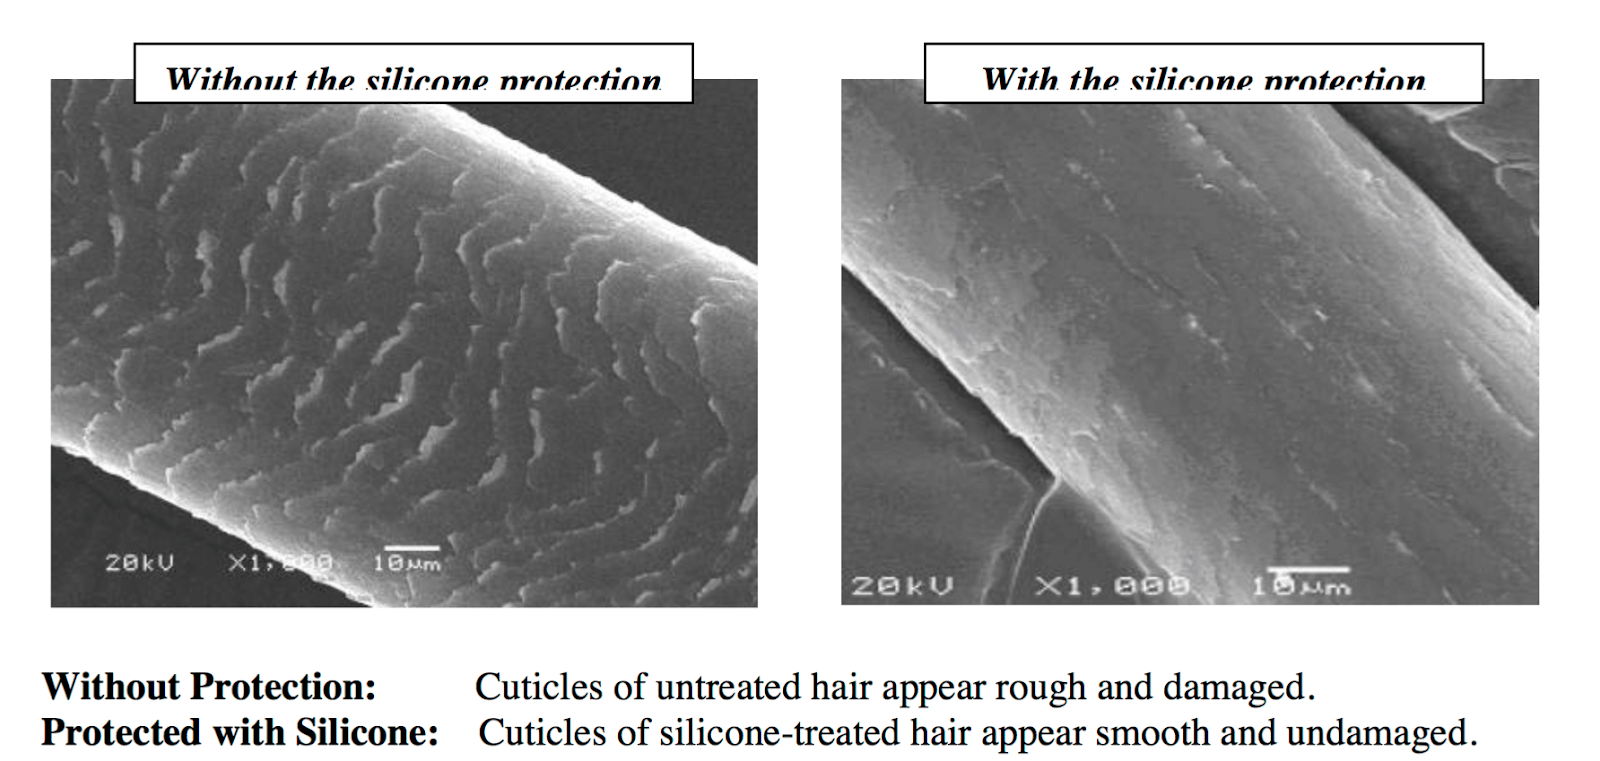 Silicones in Hair Care: Why The Bad Rap? - Hair by Brian